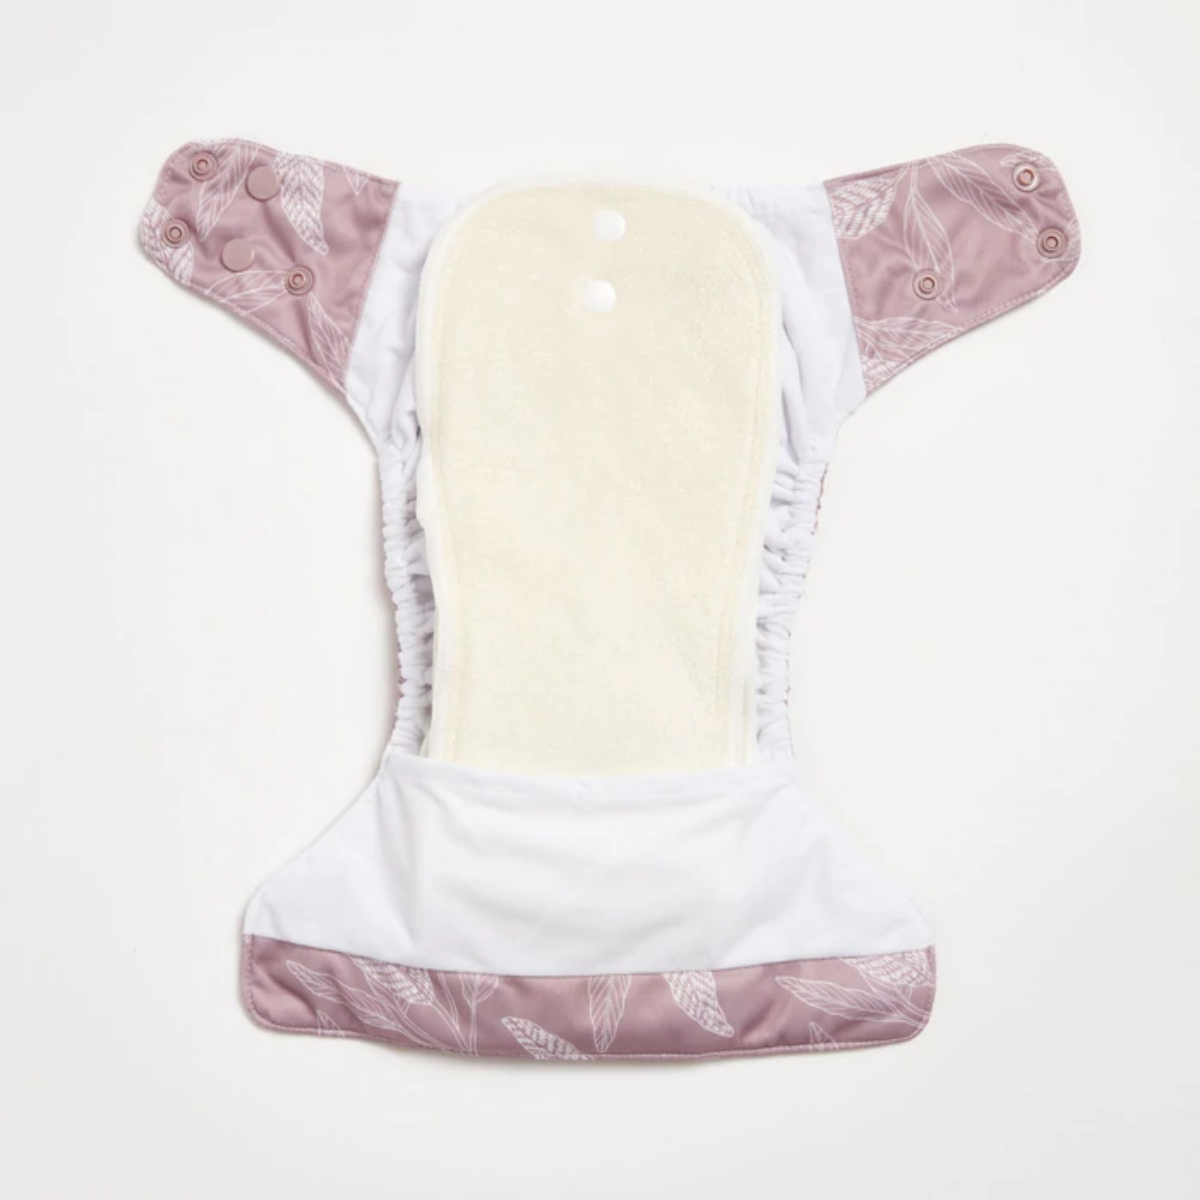 An open Mauve Native 2.0 Modern Cloth Nappy by EcoNaps on a white surface.